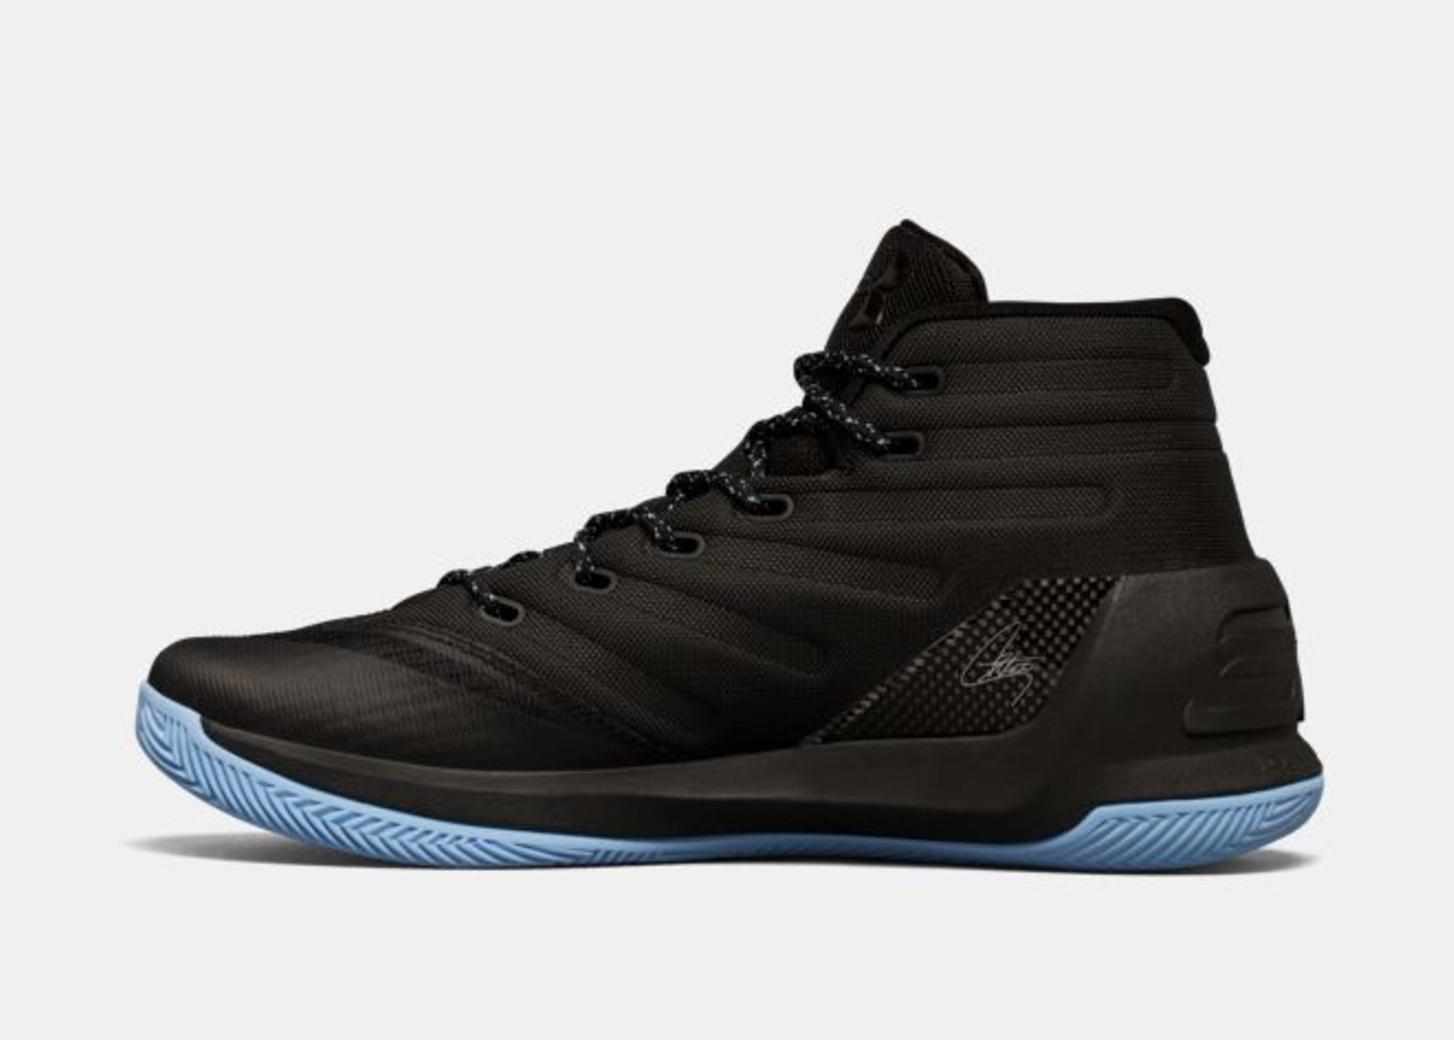 This Weekend's Under Armour Curry 3 Lands for $100 - WearTesters